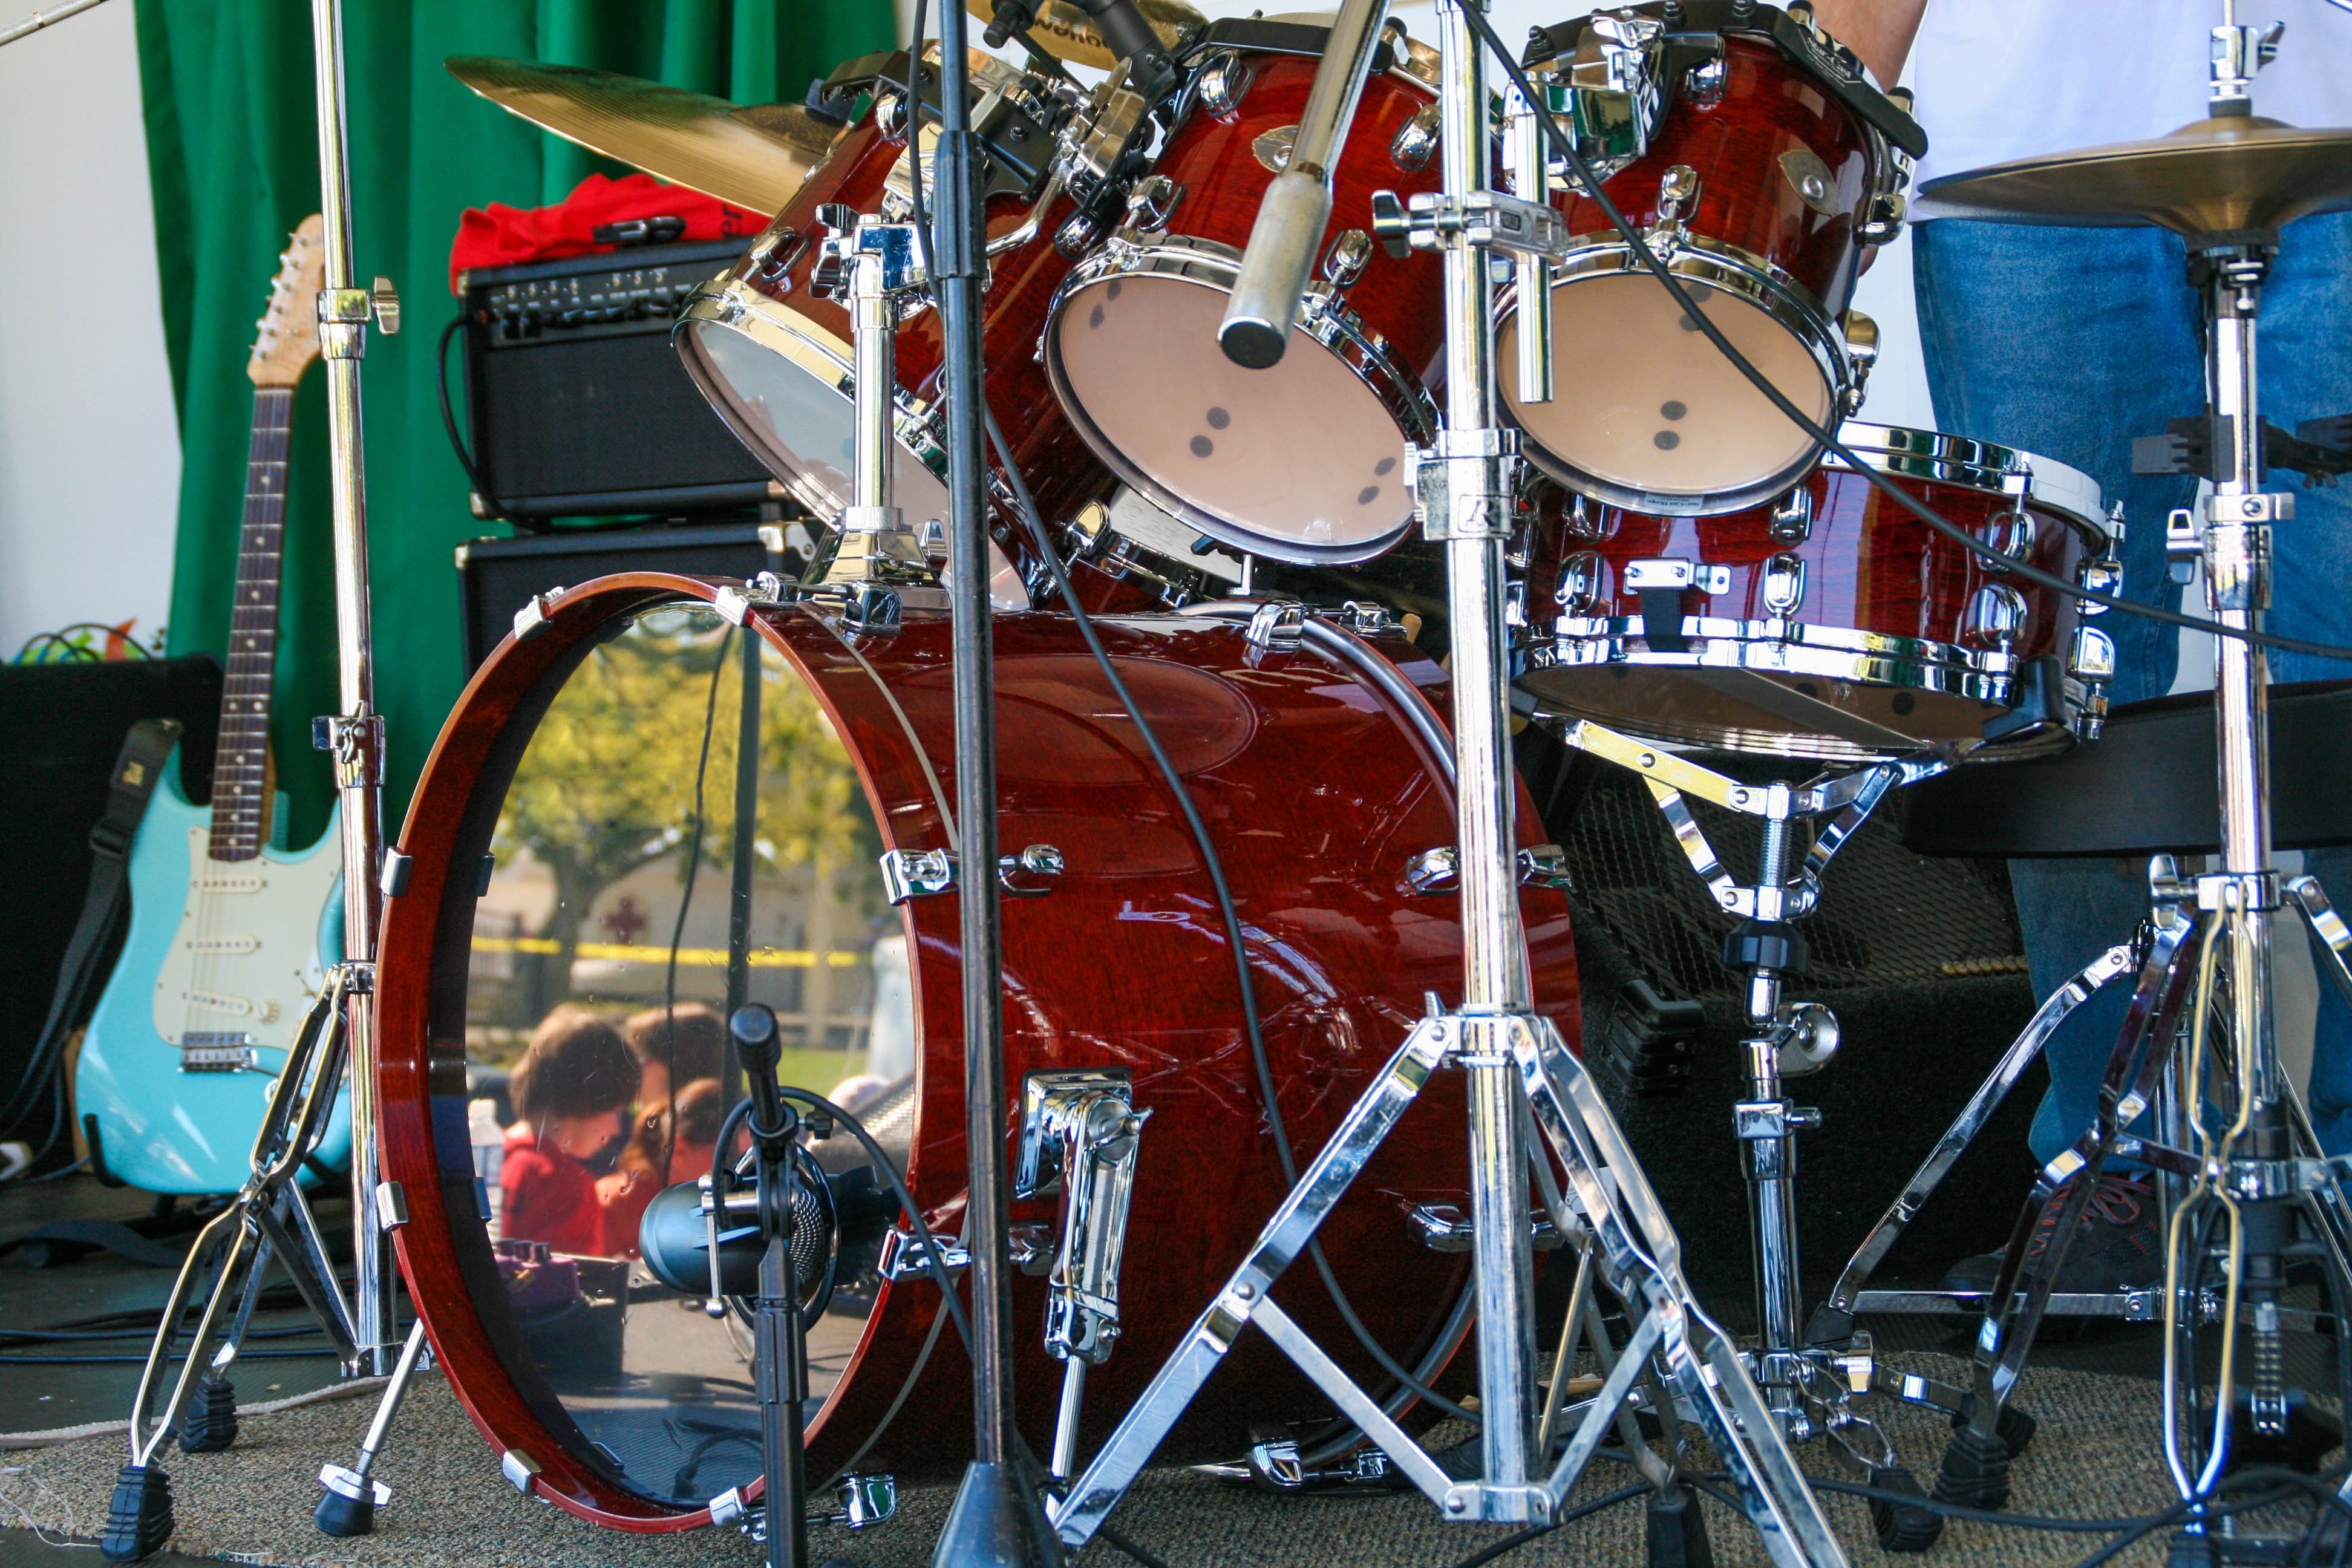 The Drums ... If you were in the band, what instrument would you be playing? #writingprompts #dailyPrompt, #prompts #Drums I'd have a complete set of red drums at that.